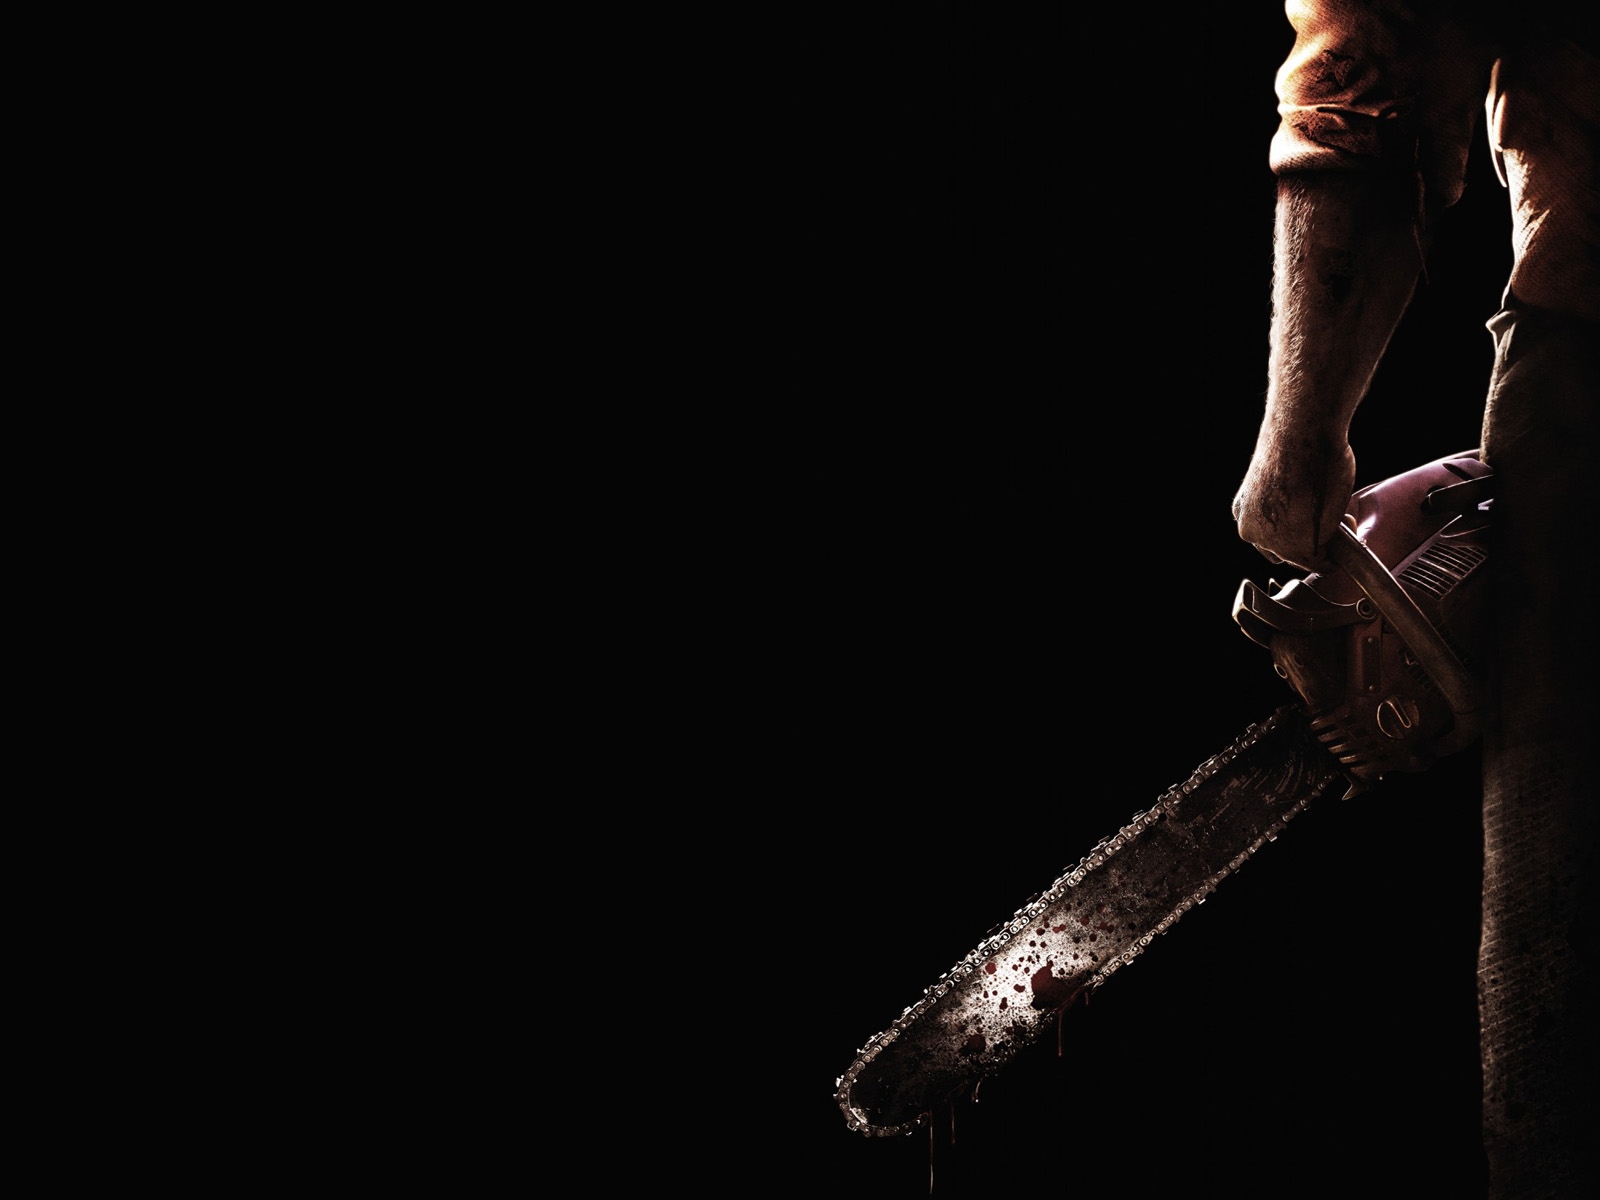 Movie Texas Chainsaw 3D HD Wallpaper | Background Image